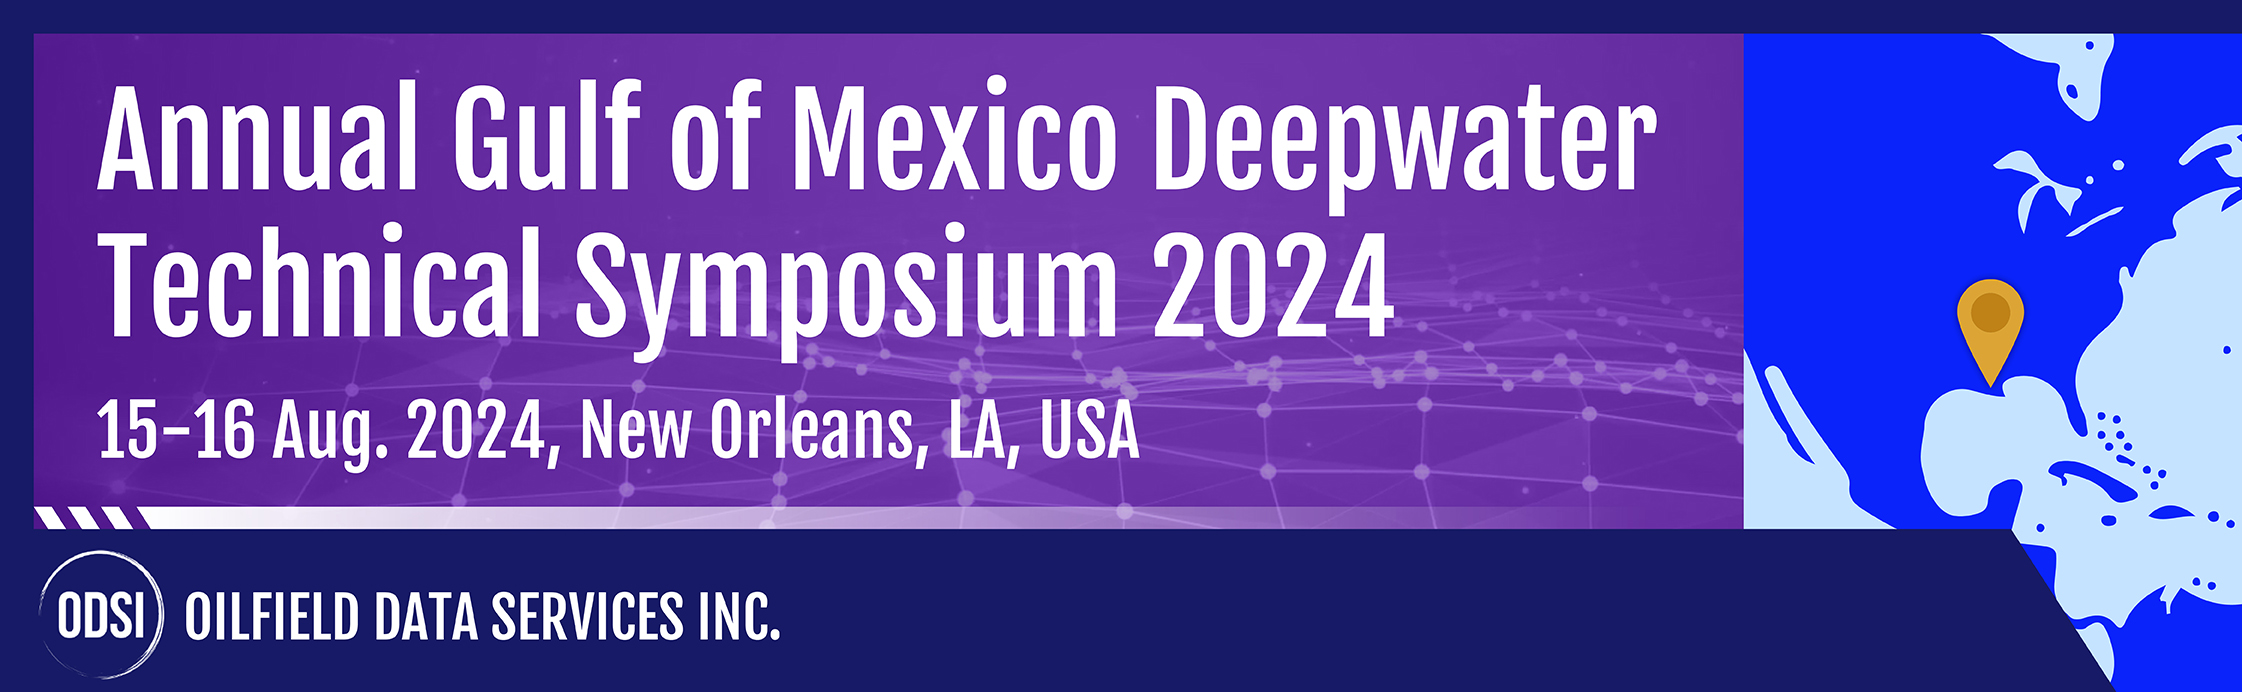 Annual Golf of Mexico Deepwater Technical Symposium 2024